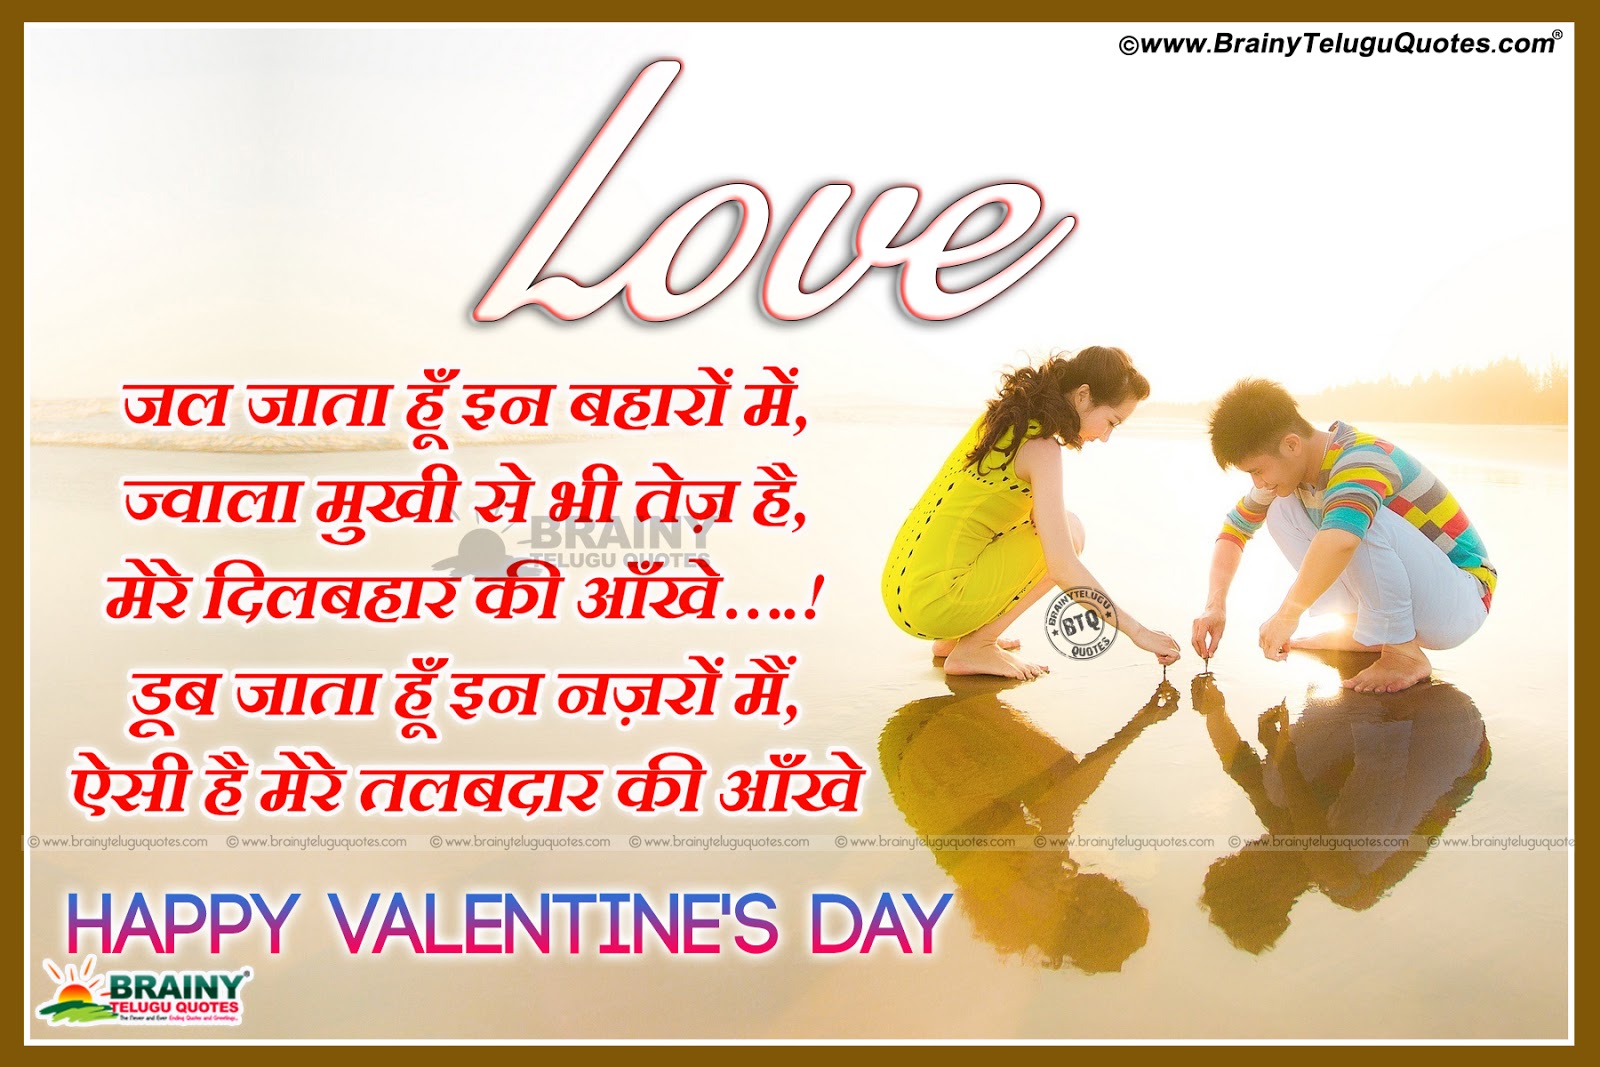 Happy Valentines Day Greetings & Wishes in Hindi with lovers deep